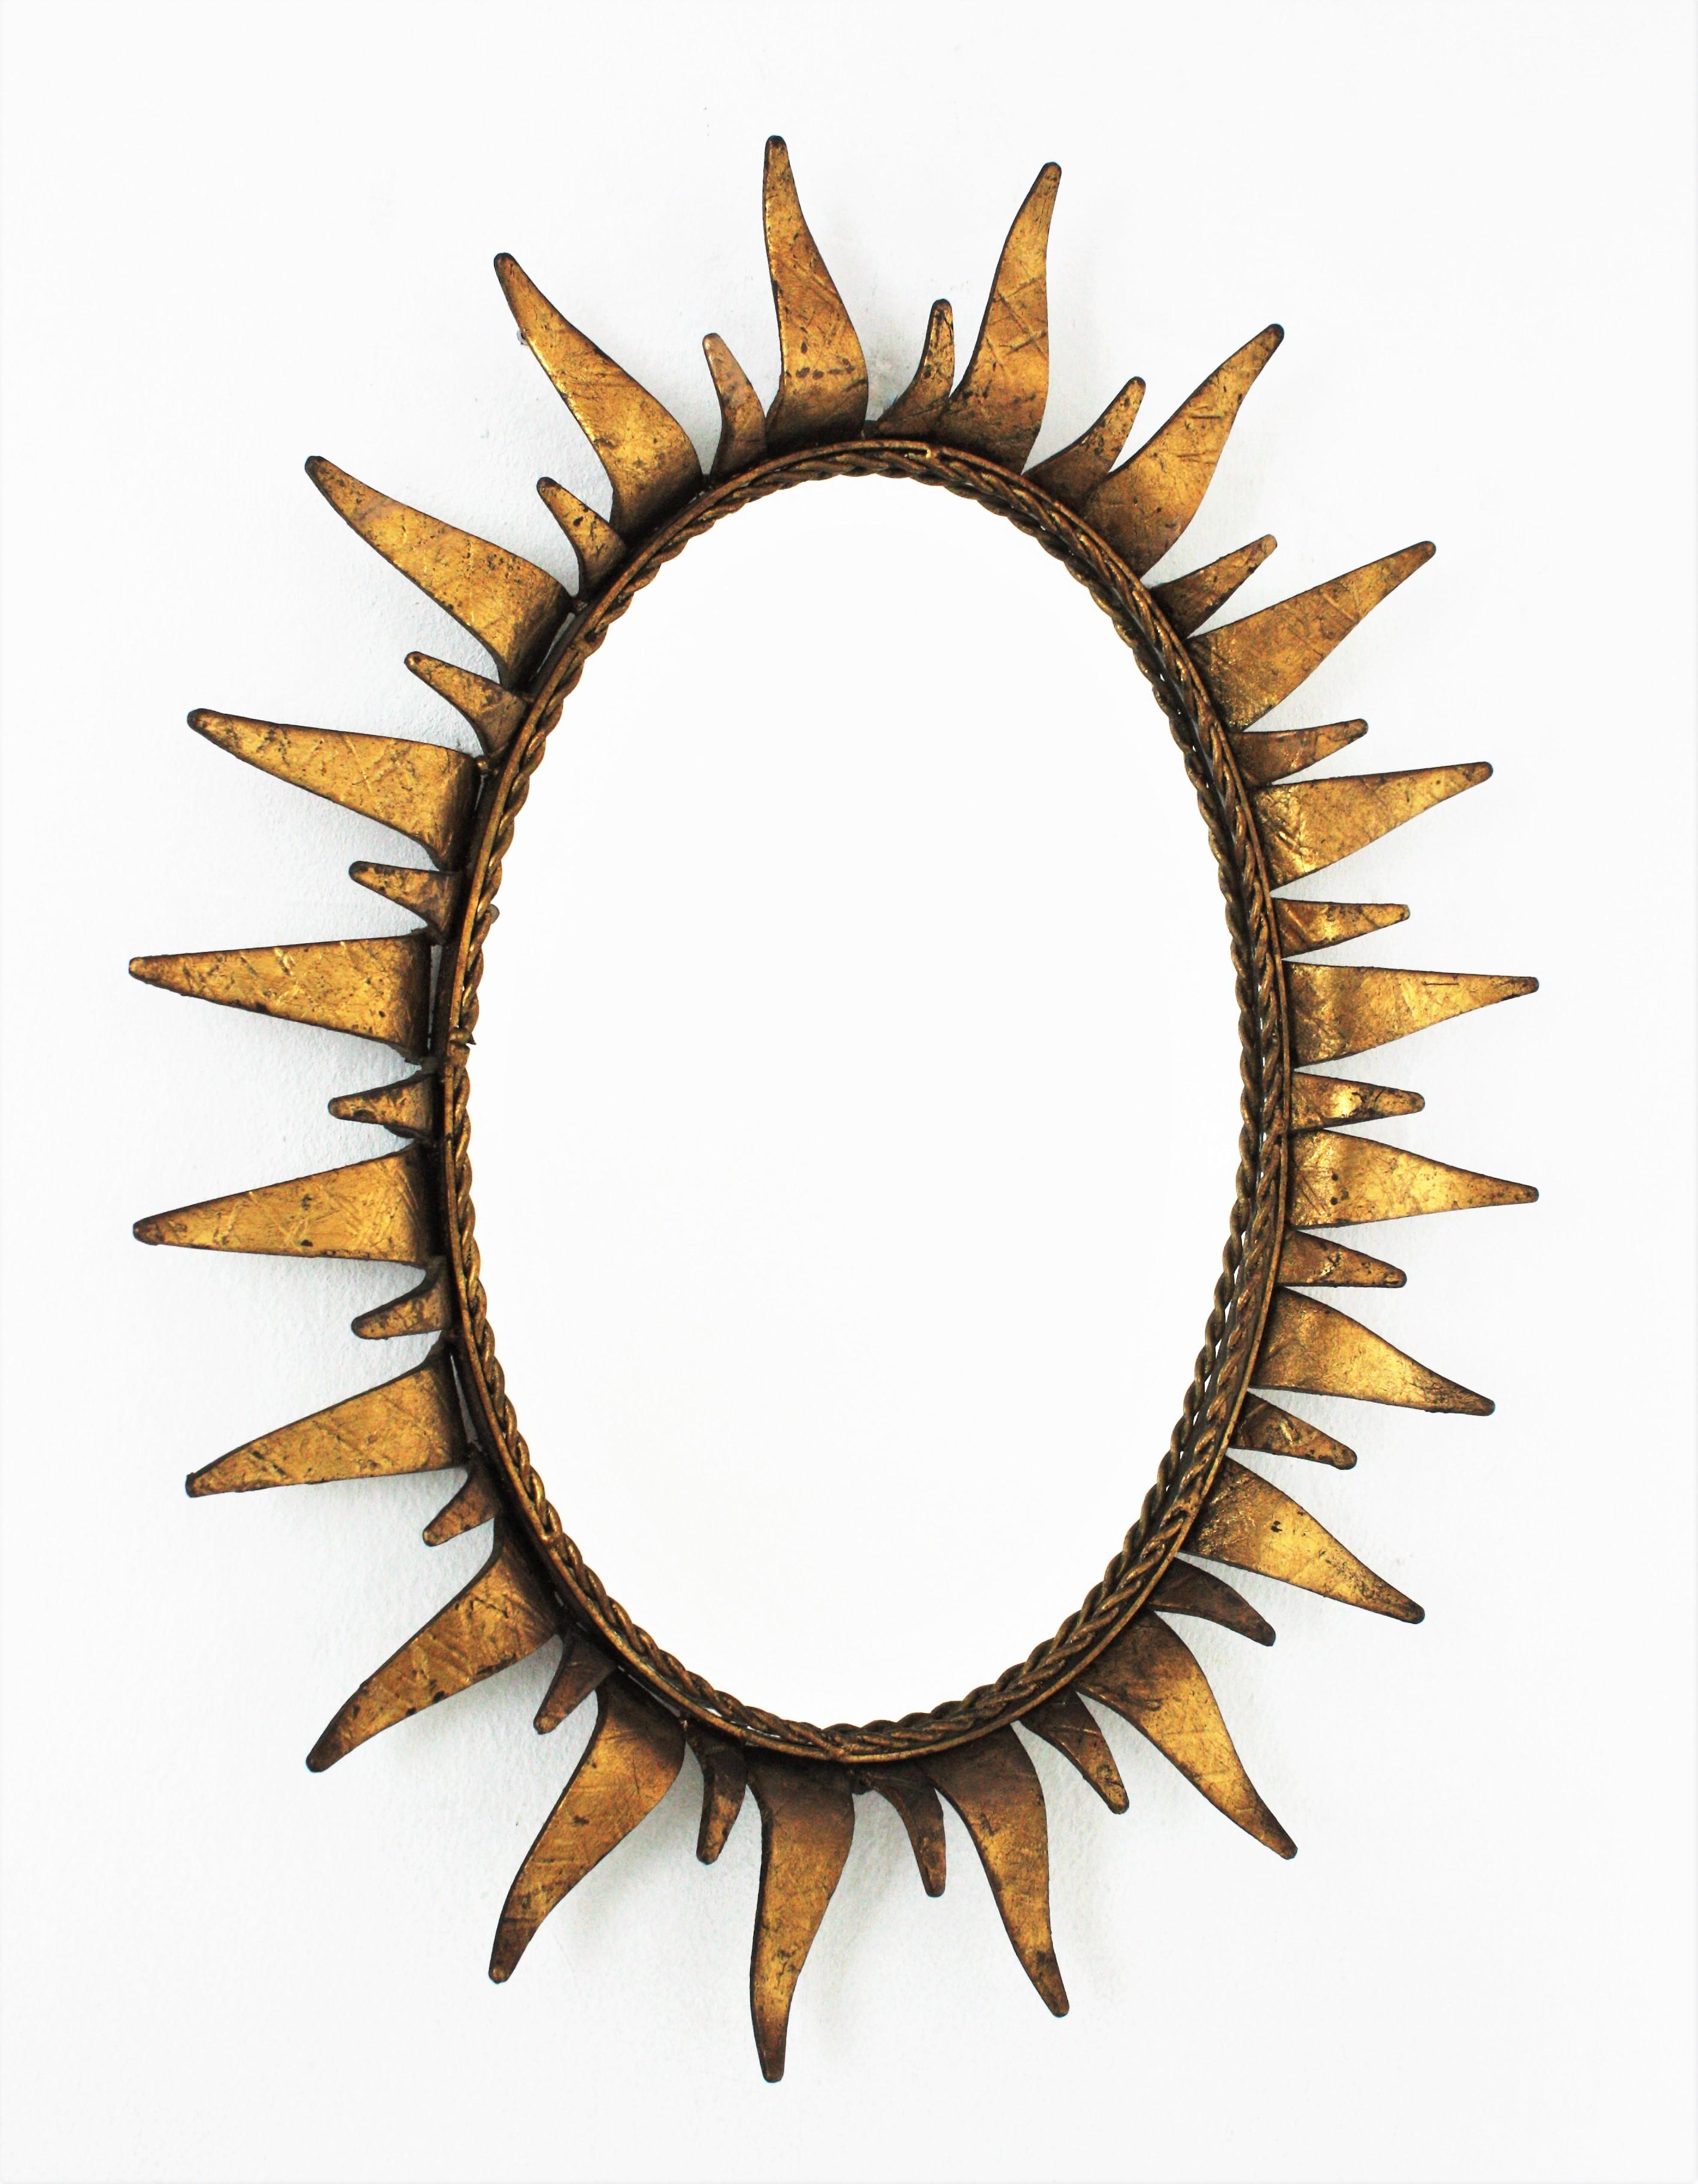 Mid-Century Modern wrought iron sunburst oval wall mirror with gold leaf finish, Spain, 1950s.
This highly decorative sunburst gilt iron mirror has a nice color. It has terrific aged patina showing its original gold leaf gilding.The rays are